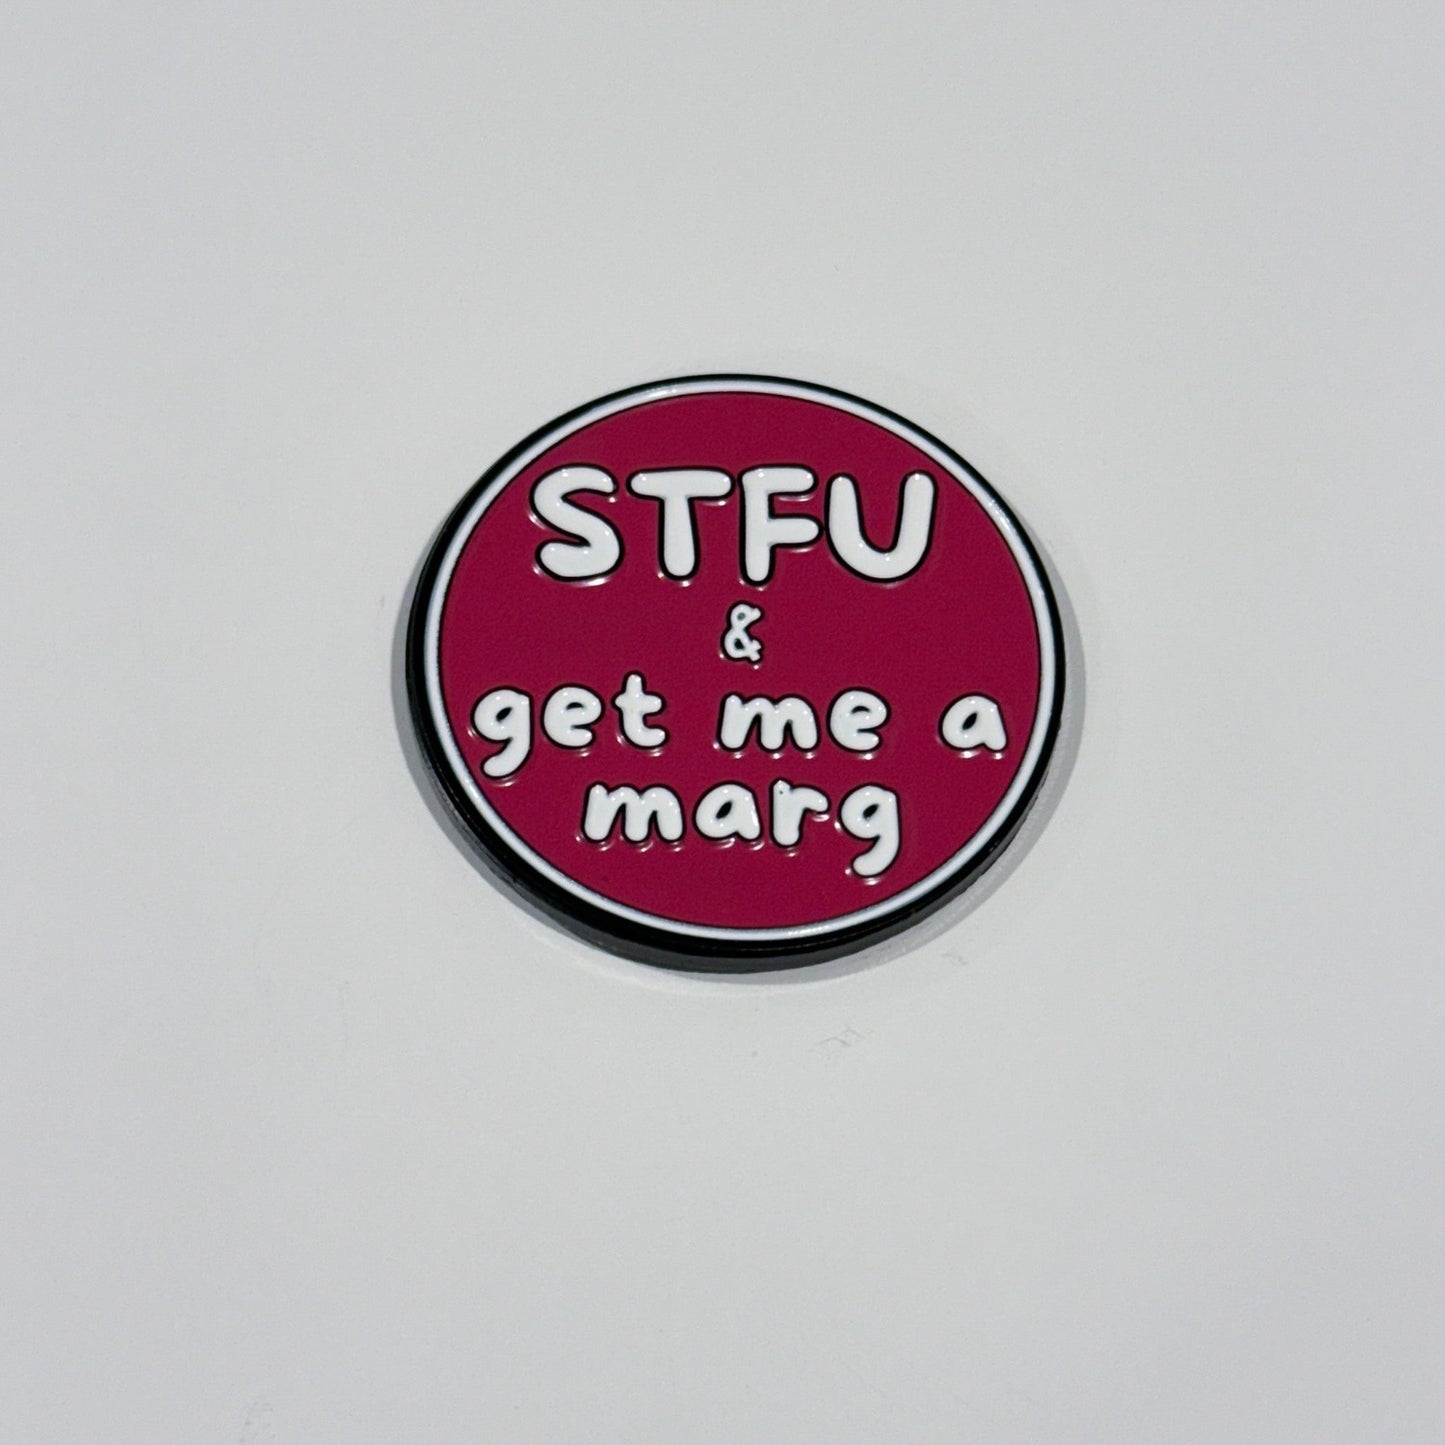 STFU & Get Me A Marg - Sassy Keychain or Pin